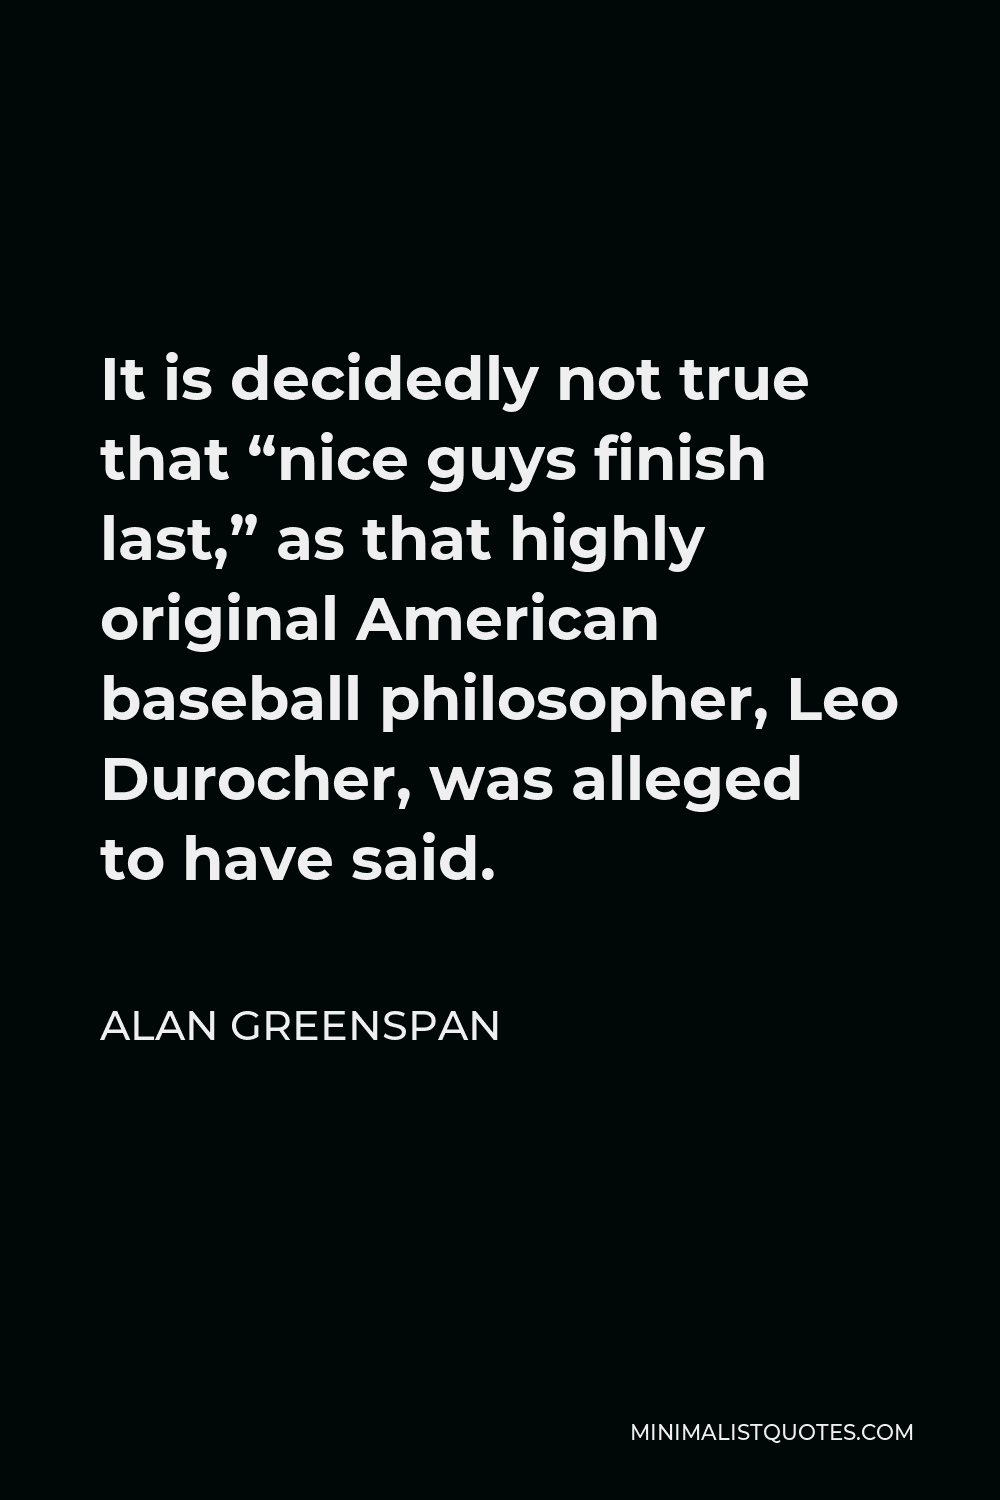 Alan Greenspan Quote - It is decidedly not true that “nice guys finish last,” as that highly original American baseball philosopher, Leo Durocher, was alleged to have said.